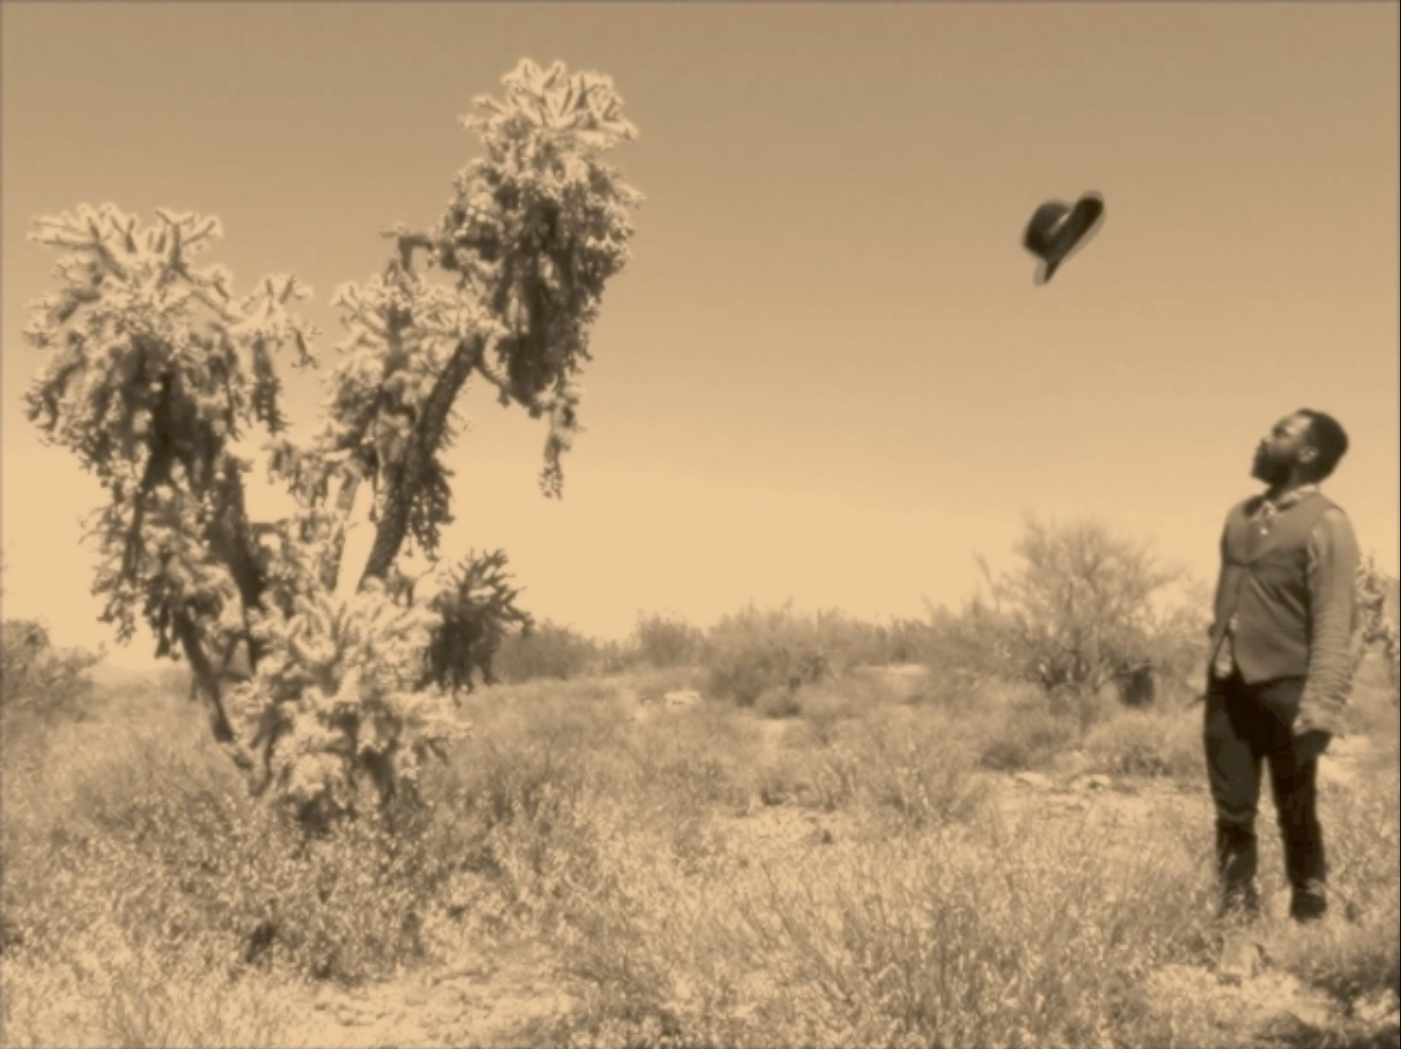 still from video; sepia image of a man looking up at a hat, mid air between himself and a tree, in a barren Arizona desert setting